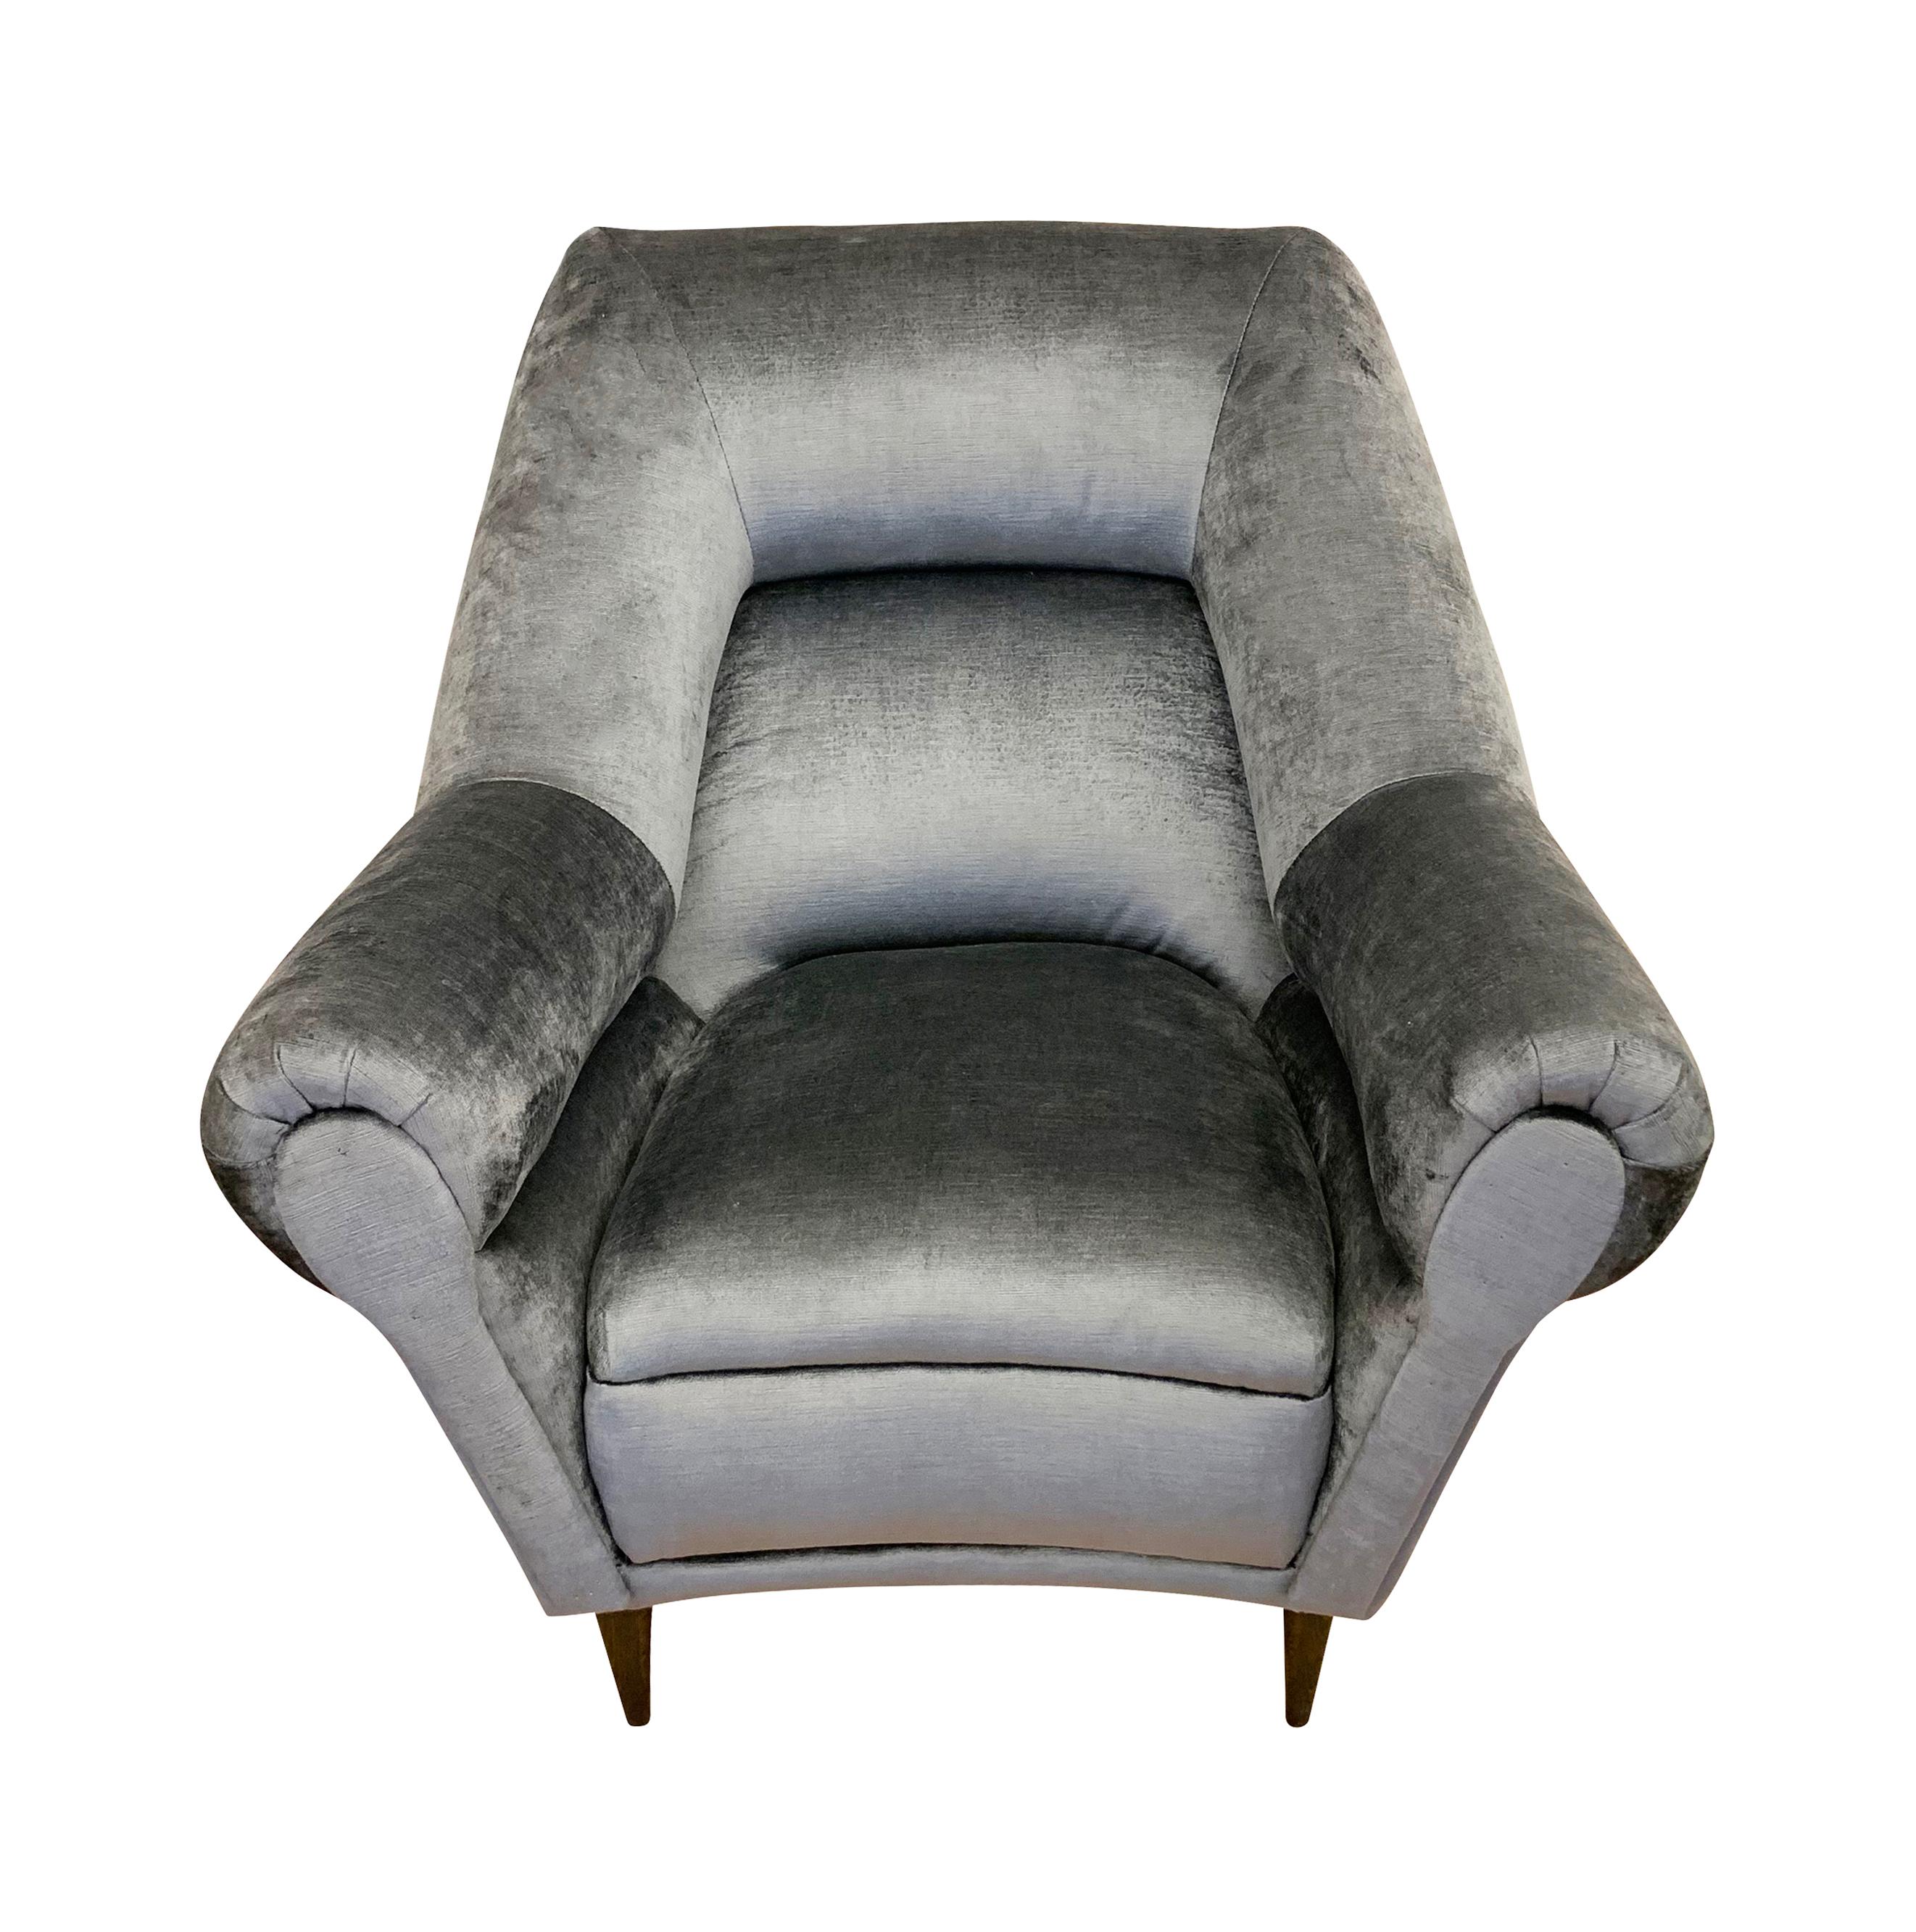 Pair of large Italian lounge chairs from the 1960s recently recovered in a gray velvet. Price per pair but can be sold individually on request.

Condition: Minor wear consistent with age and use. Recently recovered.